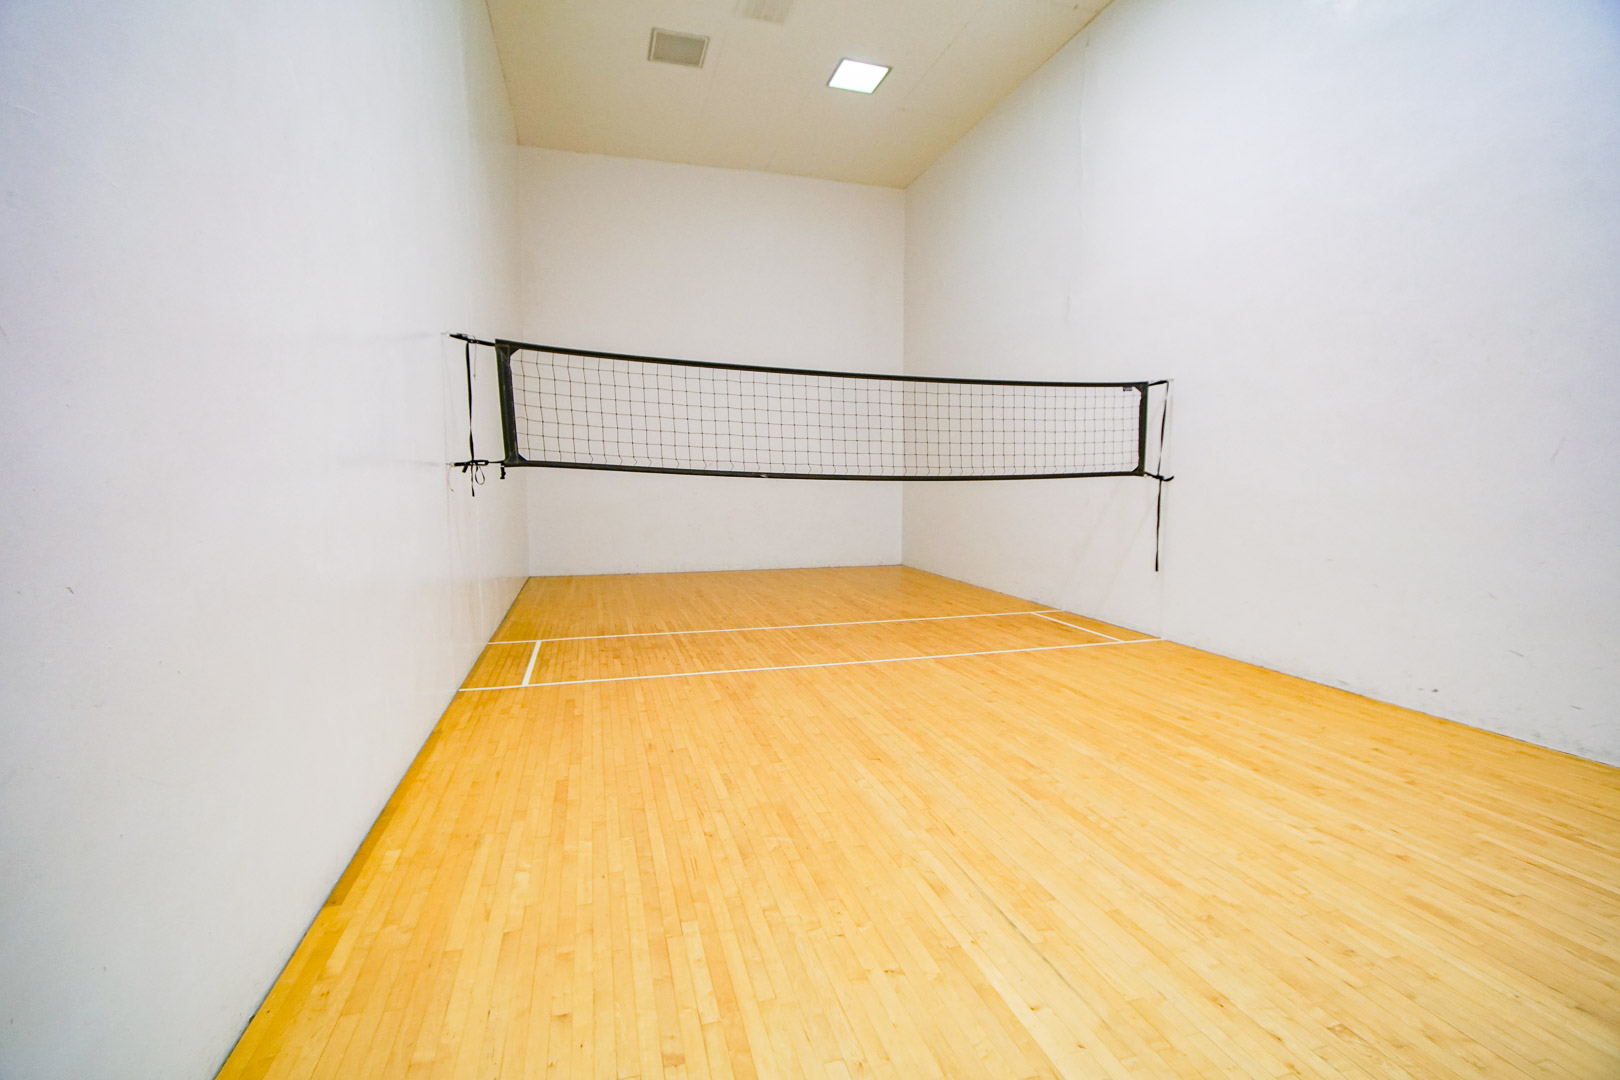 Indoor racquetball courts available at VRI's Brewster Green Resort in Massachusetts.